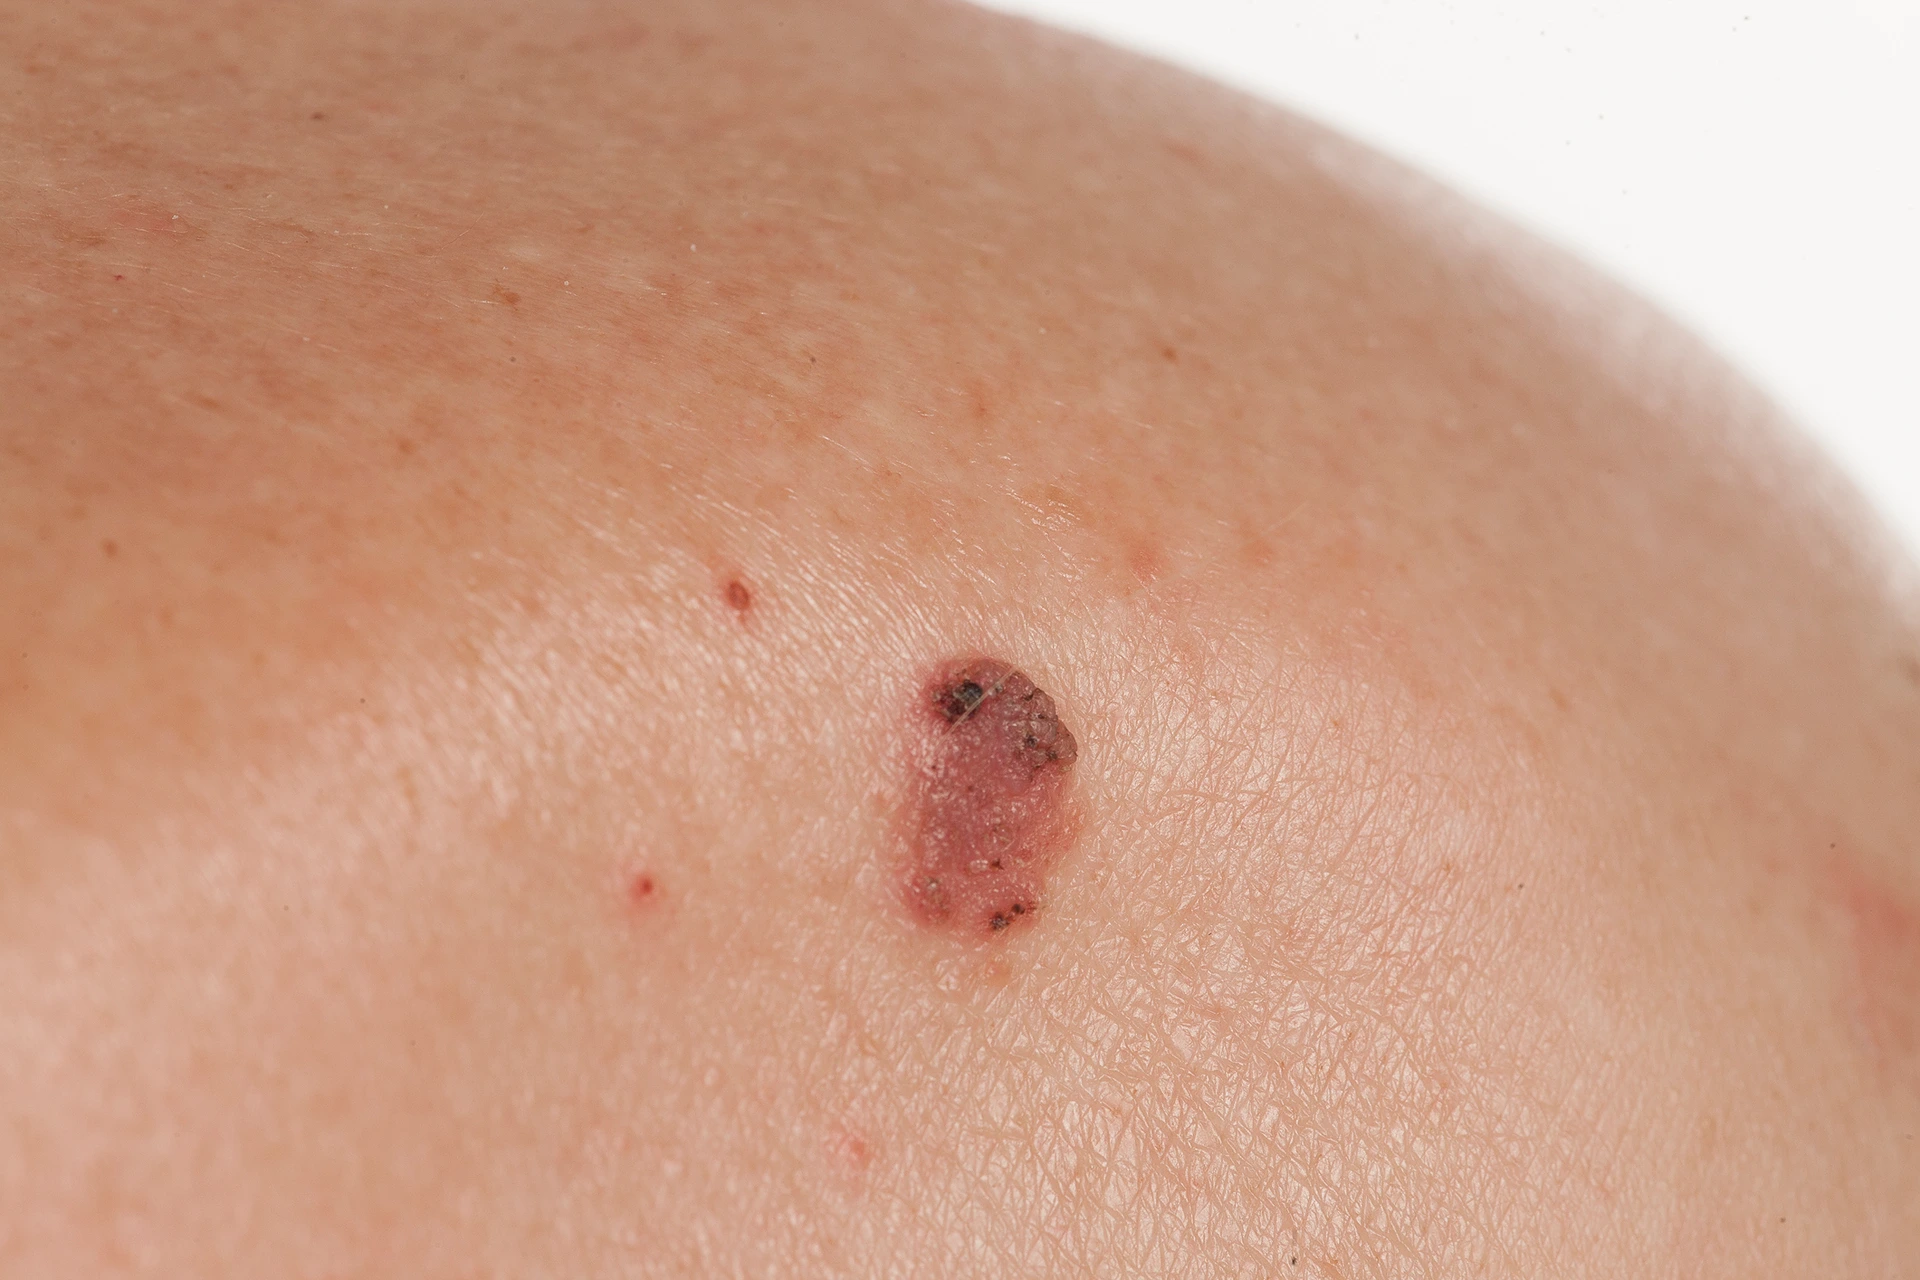 how soon should mohs surgery be done after basal cell carcinoma diagnosis